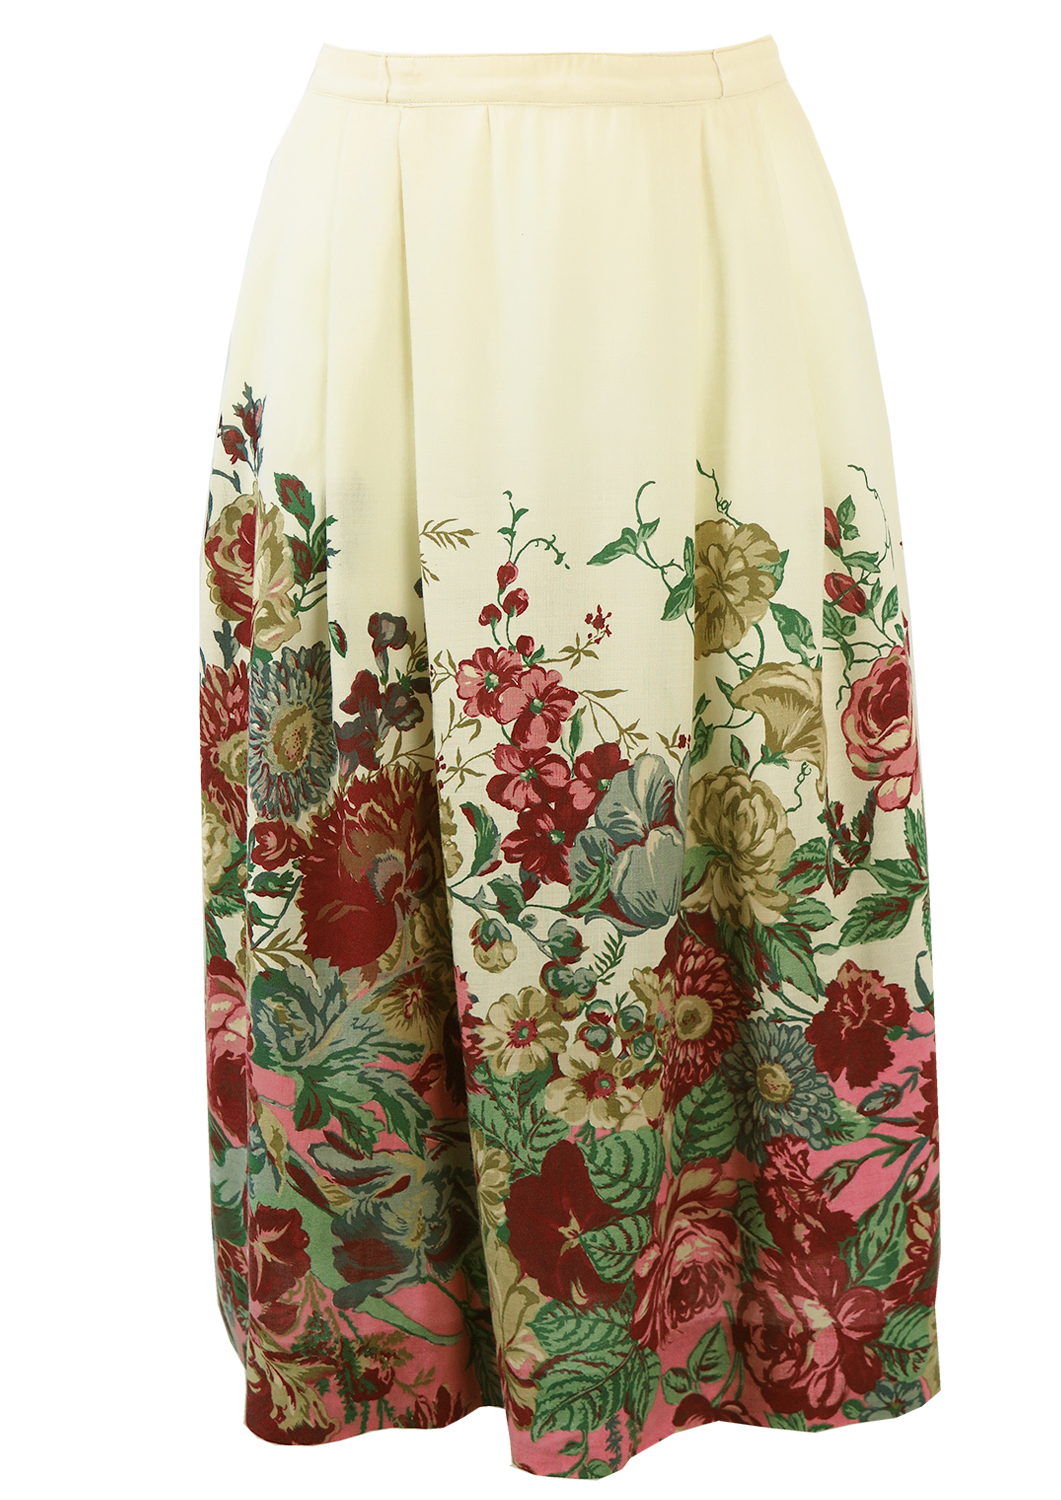 Cream Midi Length Flared Skirt with Floral Pattern - M | Reign Vintage